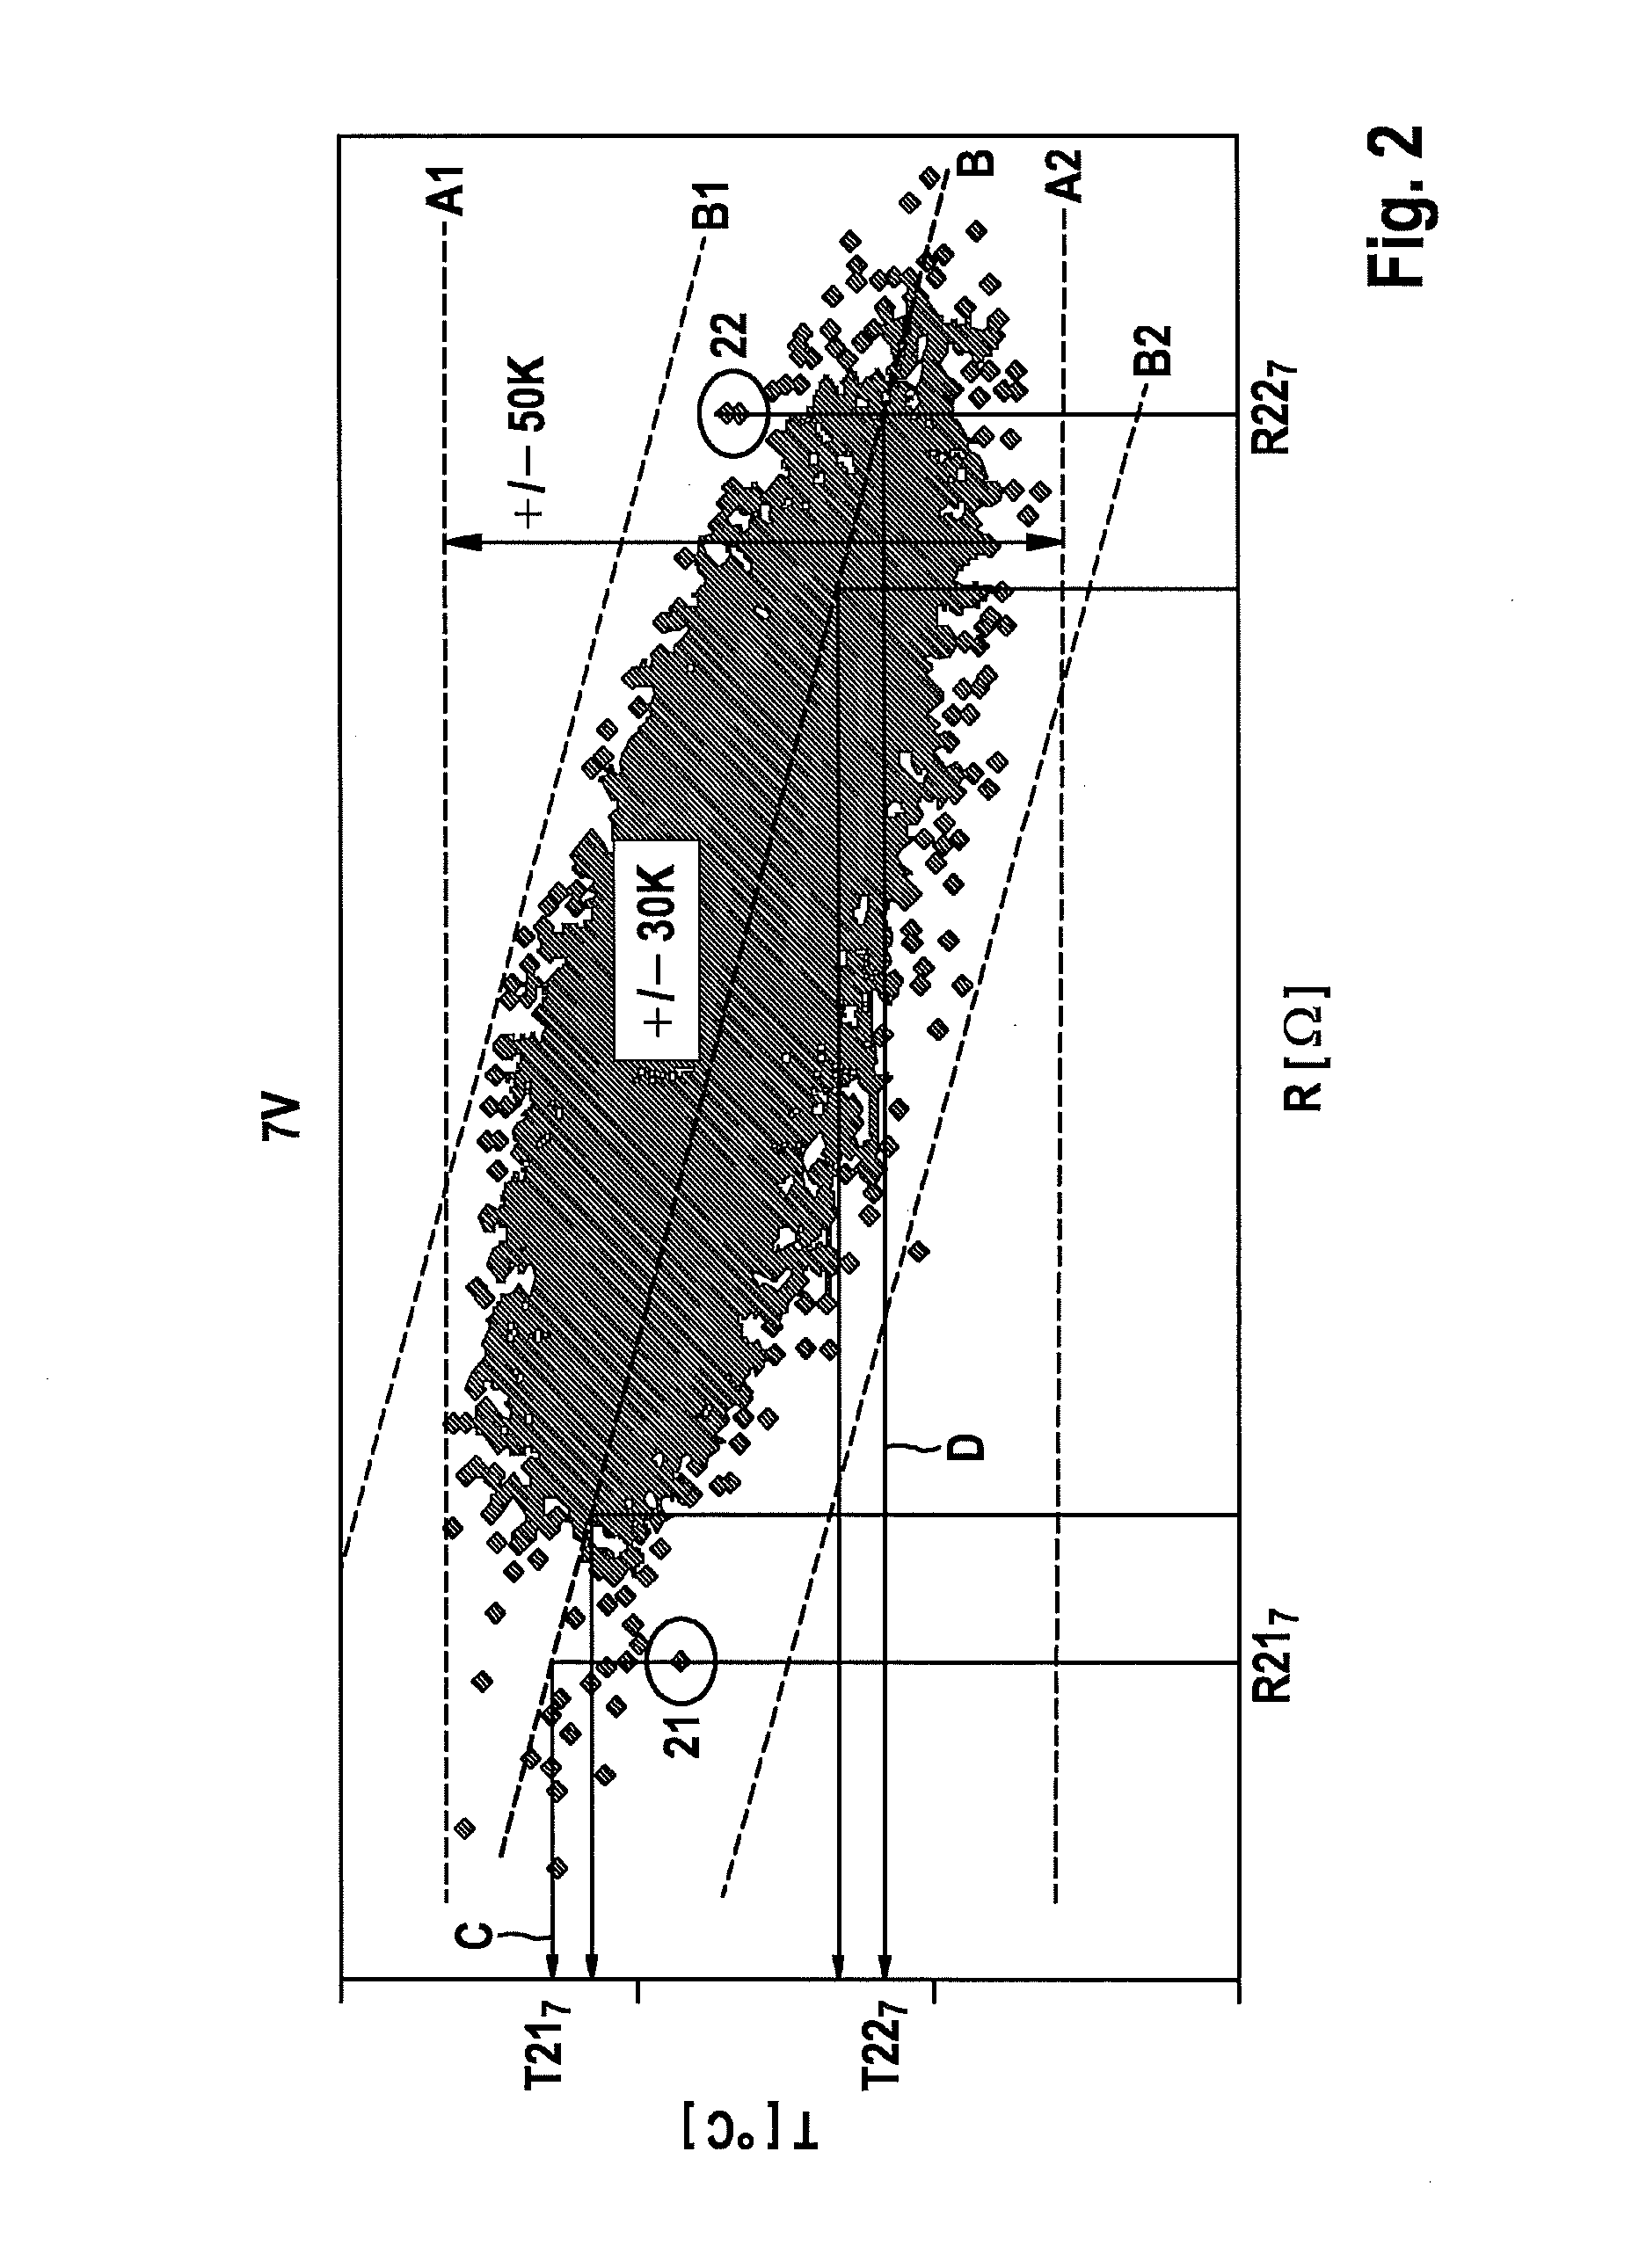 Method and device for determining a temperature of a sheathed-element glow plug during operation in an internal combustion engine